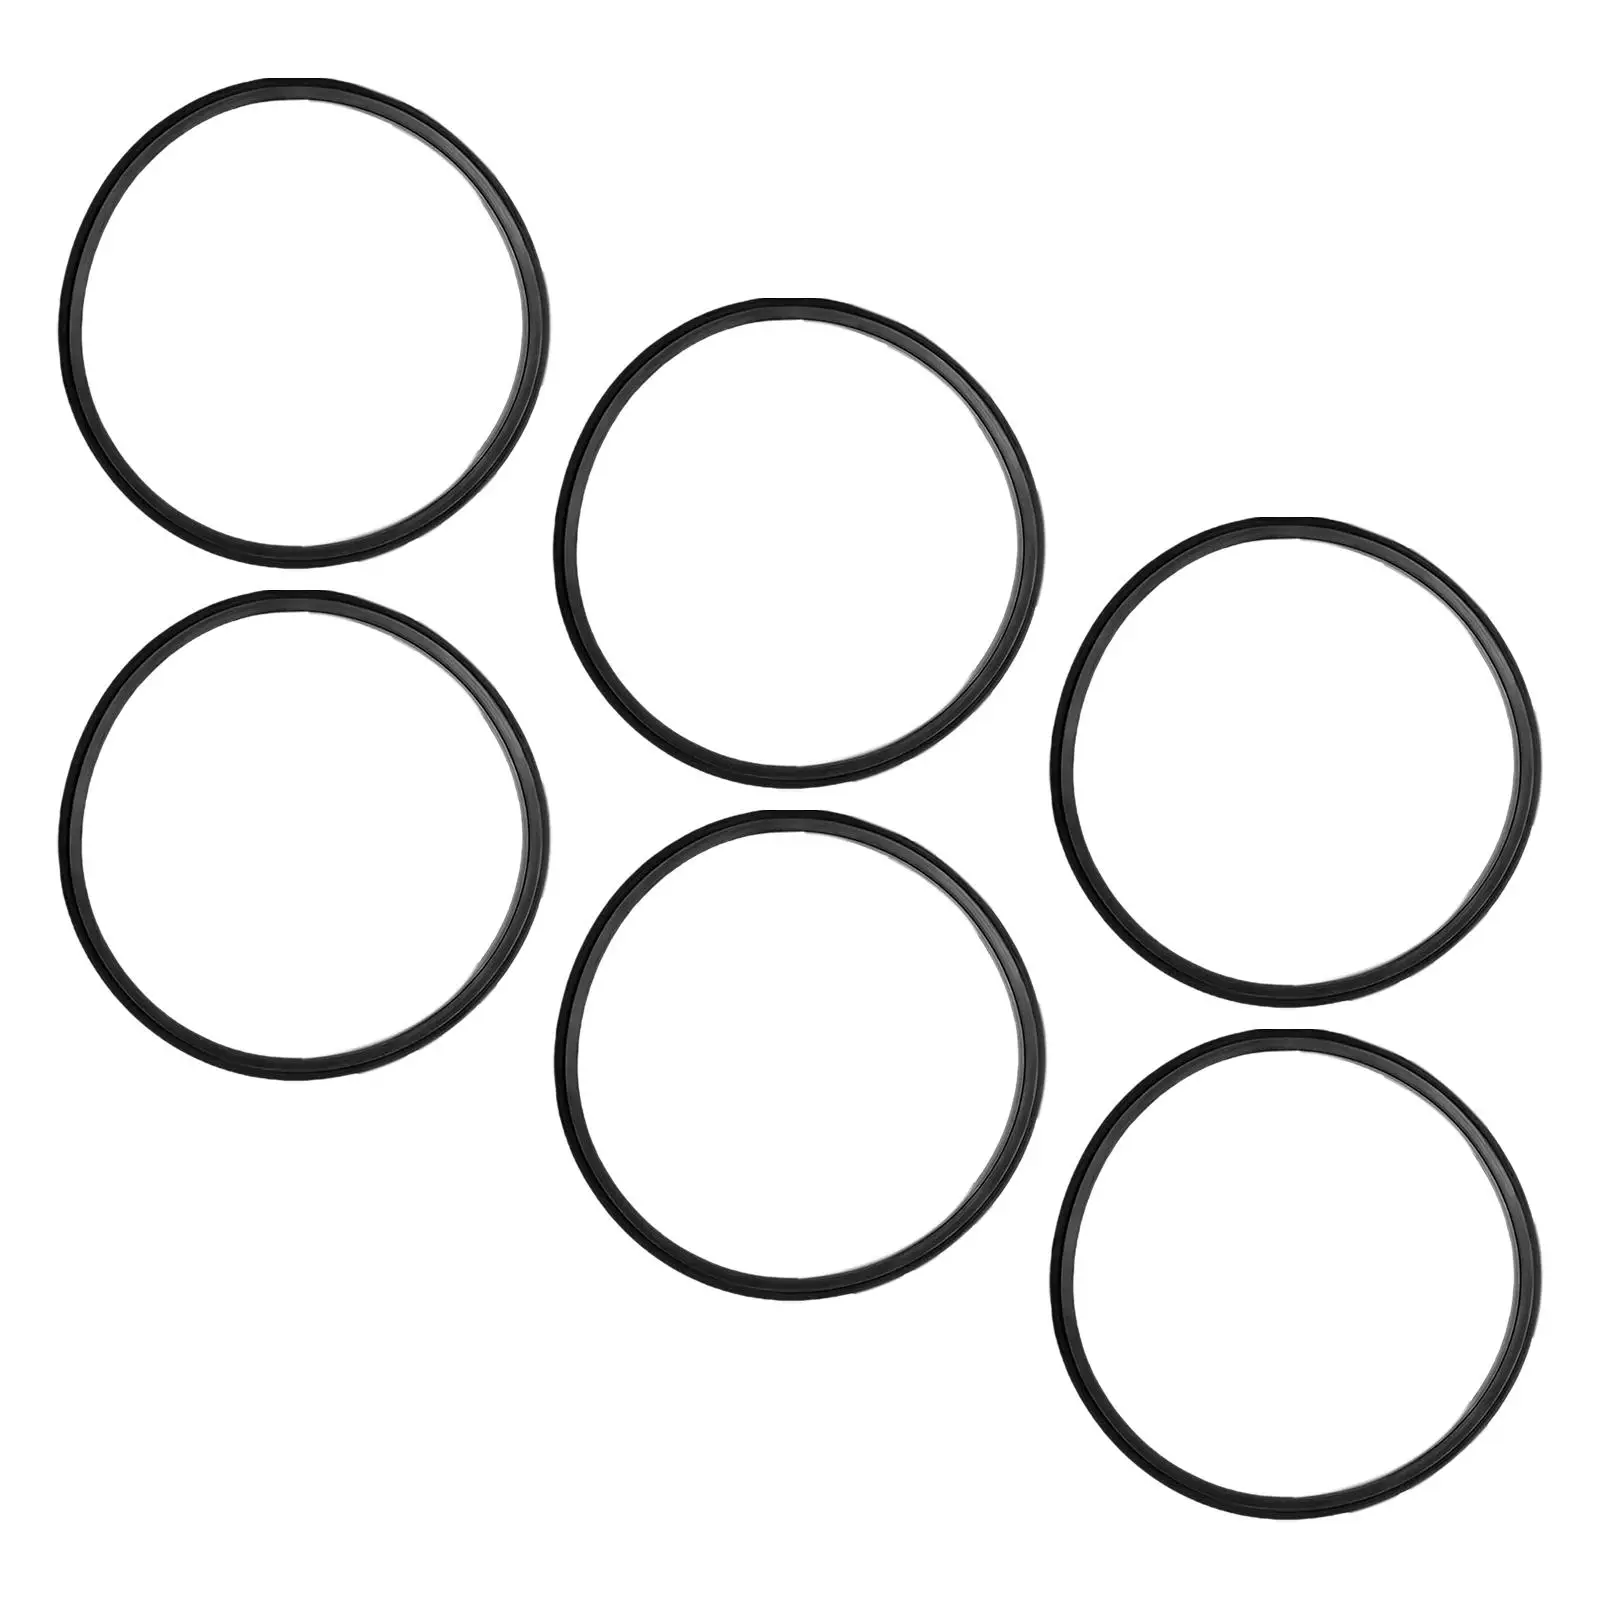 6Pcs Silicone Jar Gasket Gaskets Part Replacement Silicone Sealing Rings